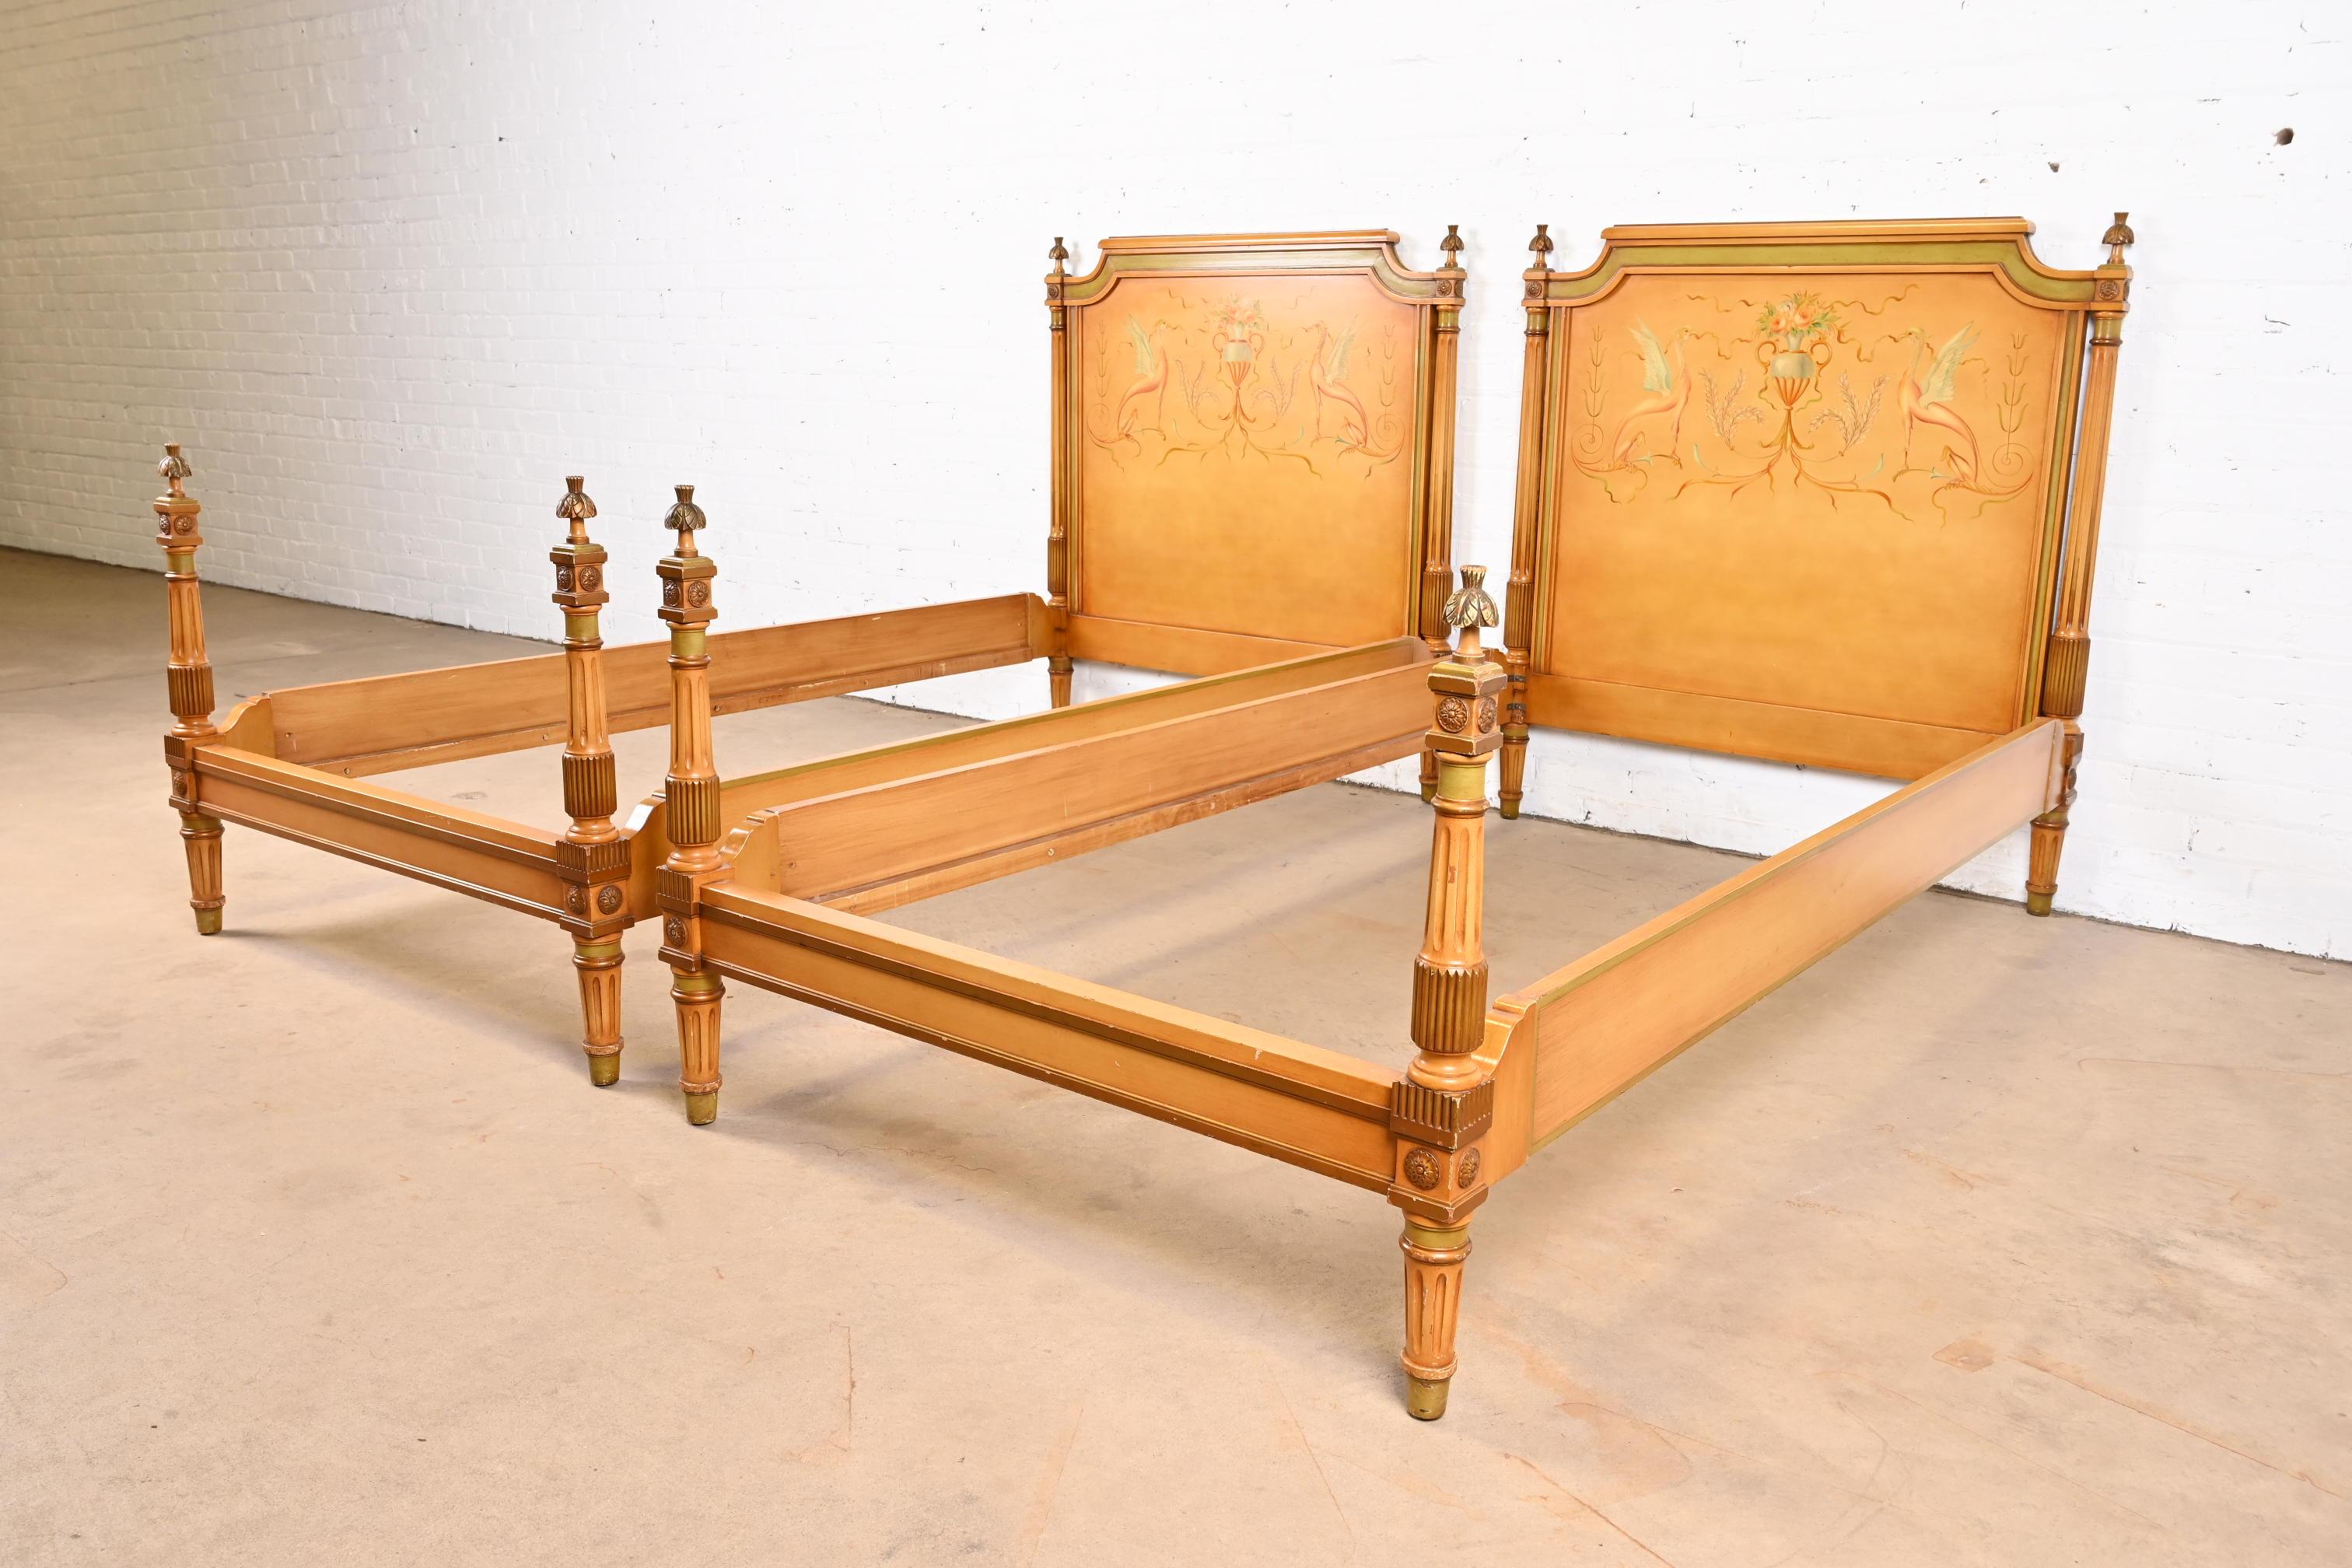 20th Century Neoclassical Painted Parcel-Gilt Twin Size Beds in the Manner of Grosfeld House